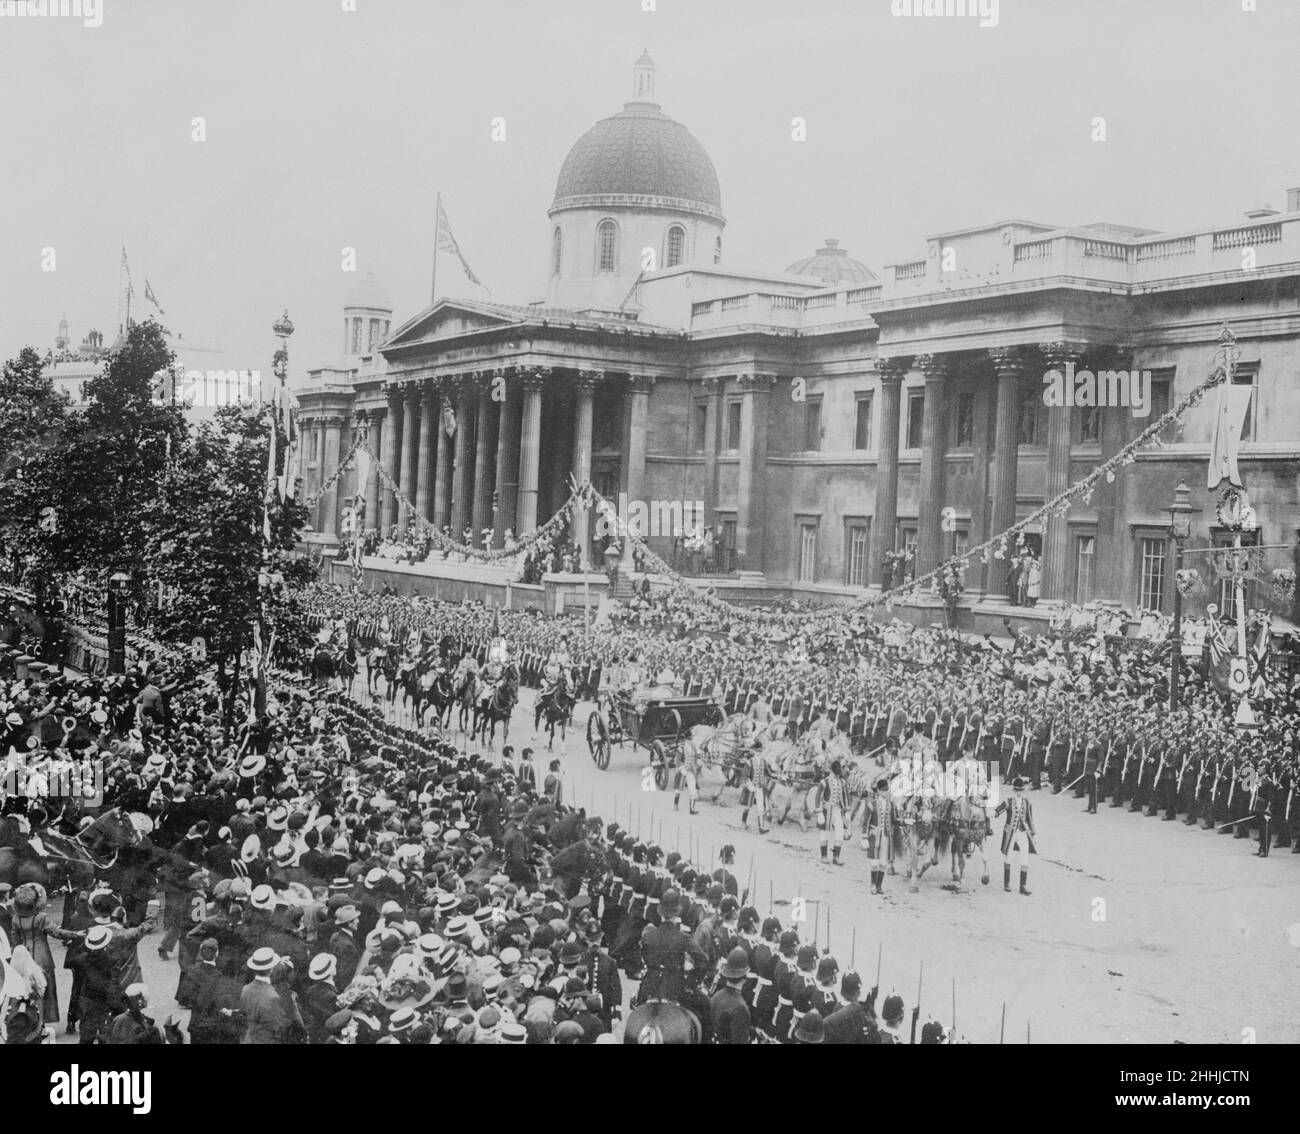 Coronation of King George V. Thousands of people cheer from the side of the road as the procession passes Trafalgar Square. 22nd June 1911. Stock Photo